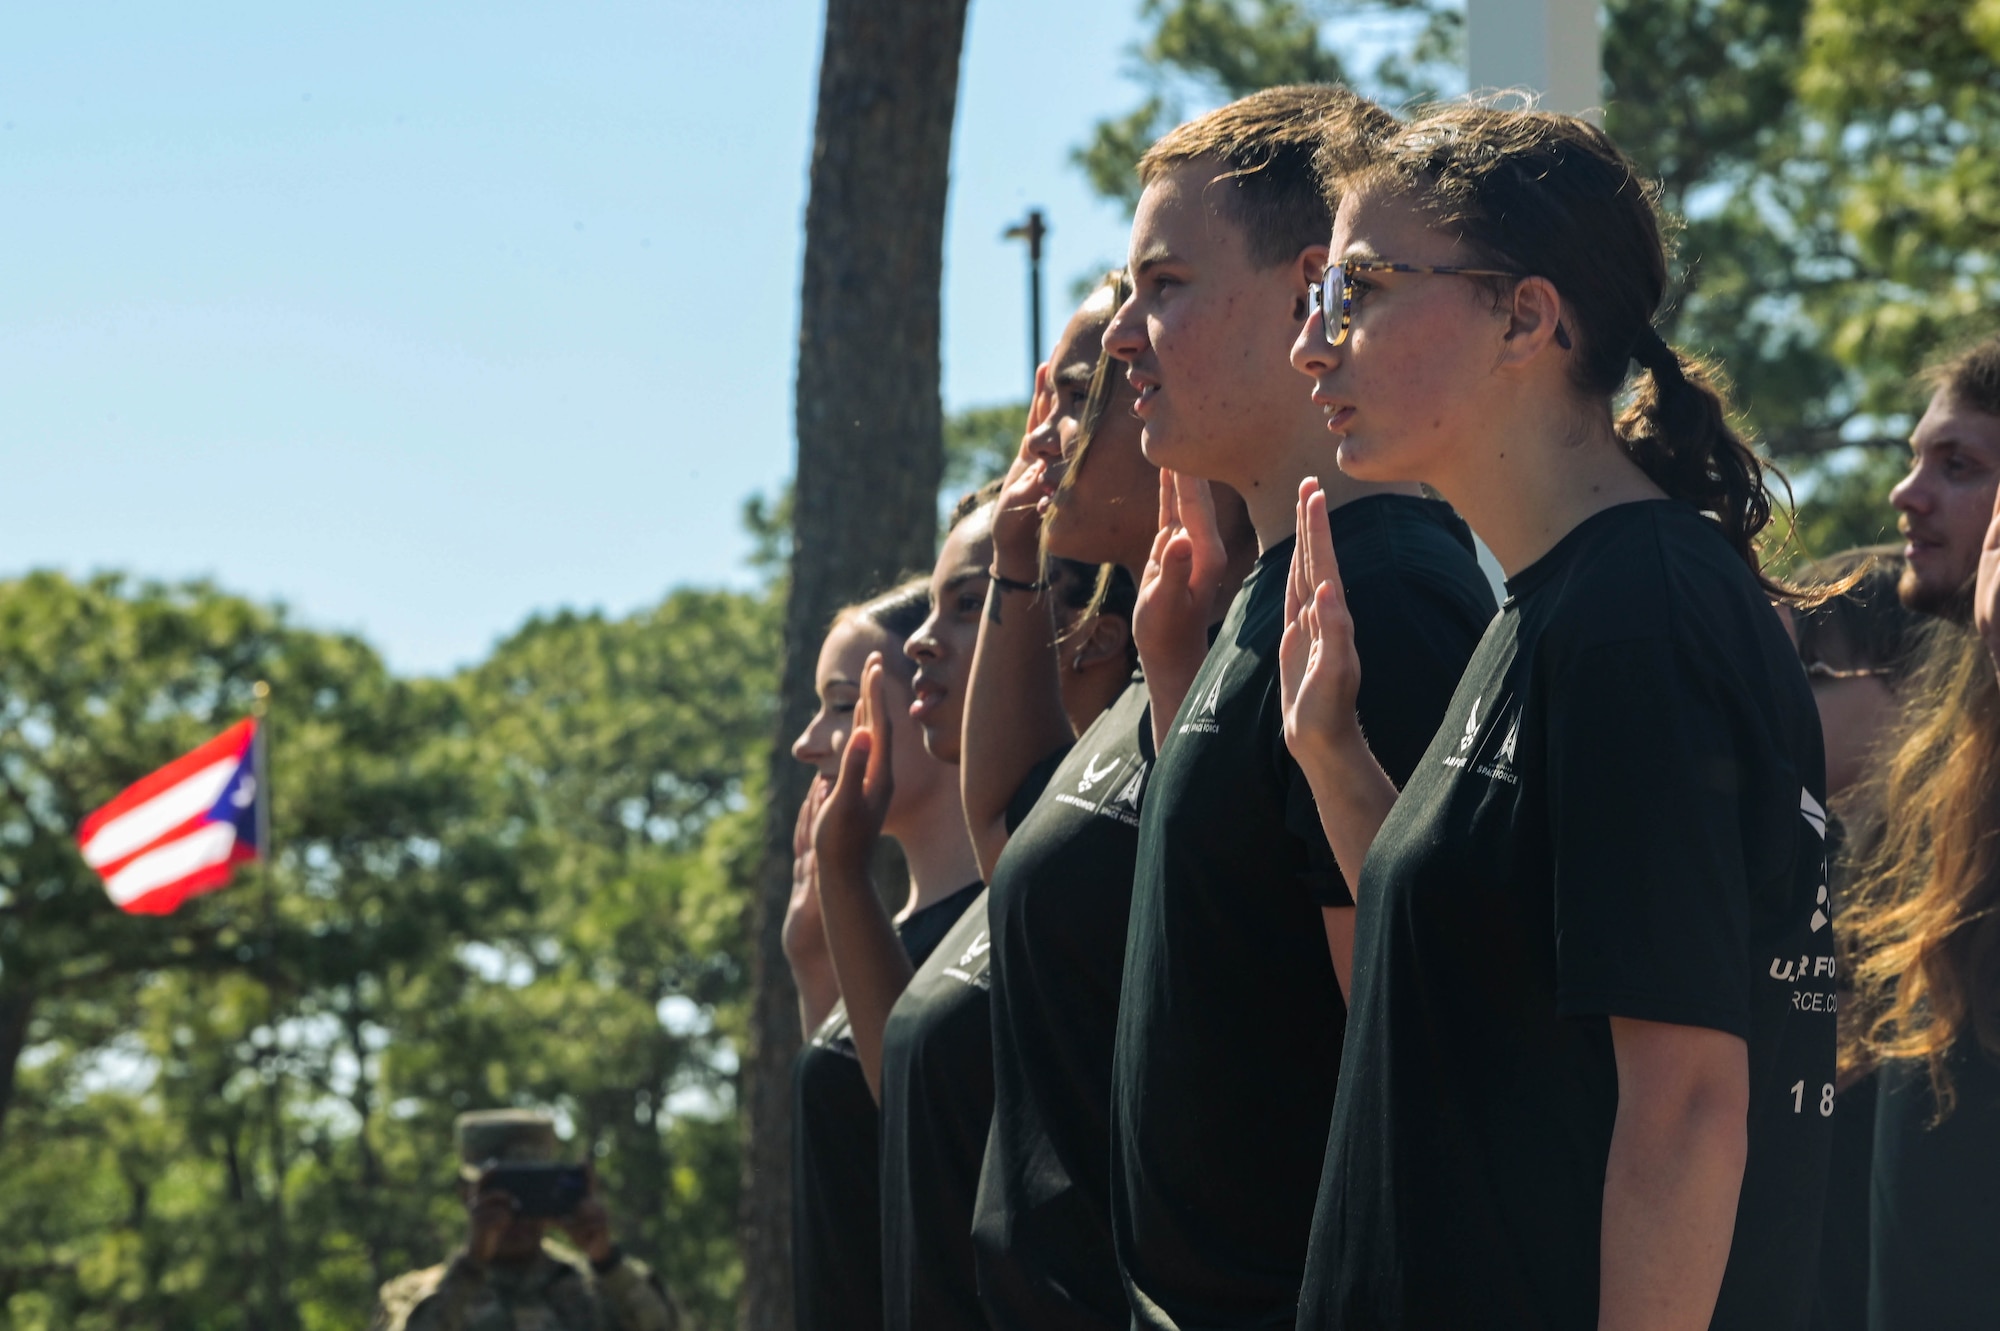 Thirty members of the U.S. Air Force Delayed Entry Program take the oath of enlistment during the grand opening of the memorial air park at Hurlburt Field, Florida, April 22, 2024.